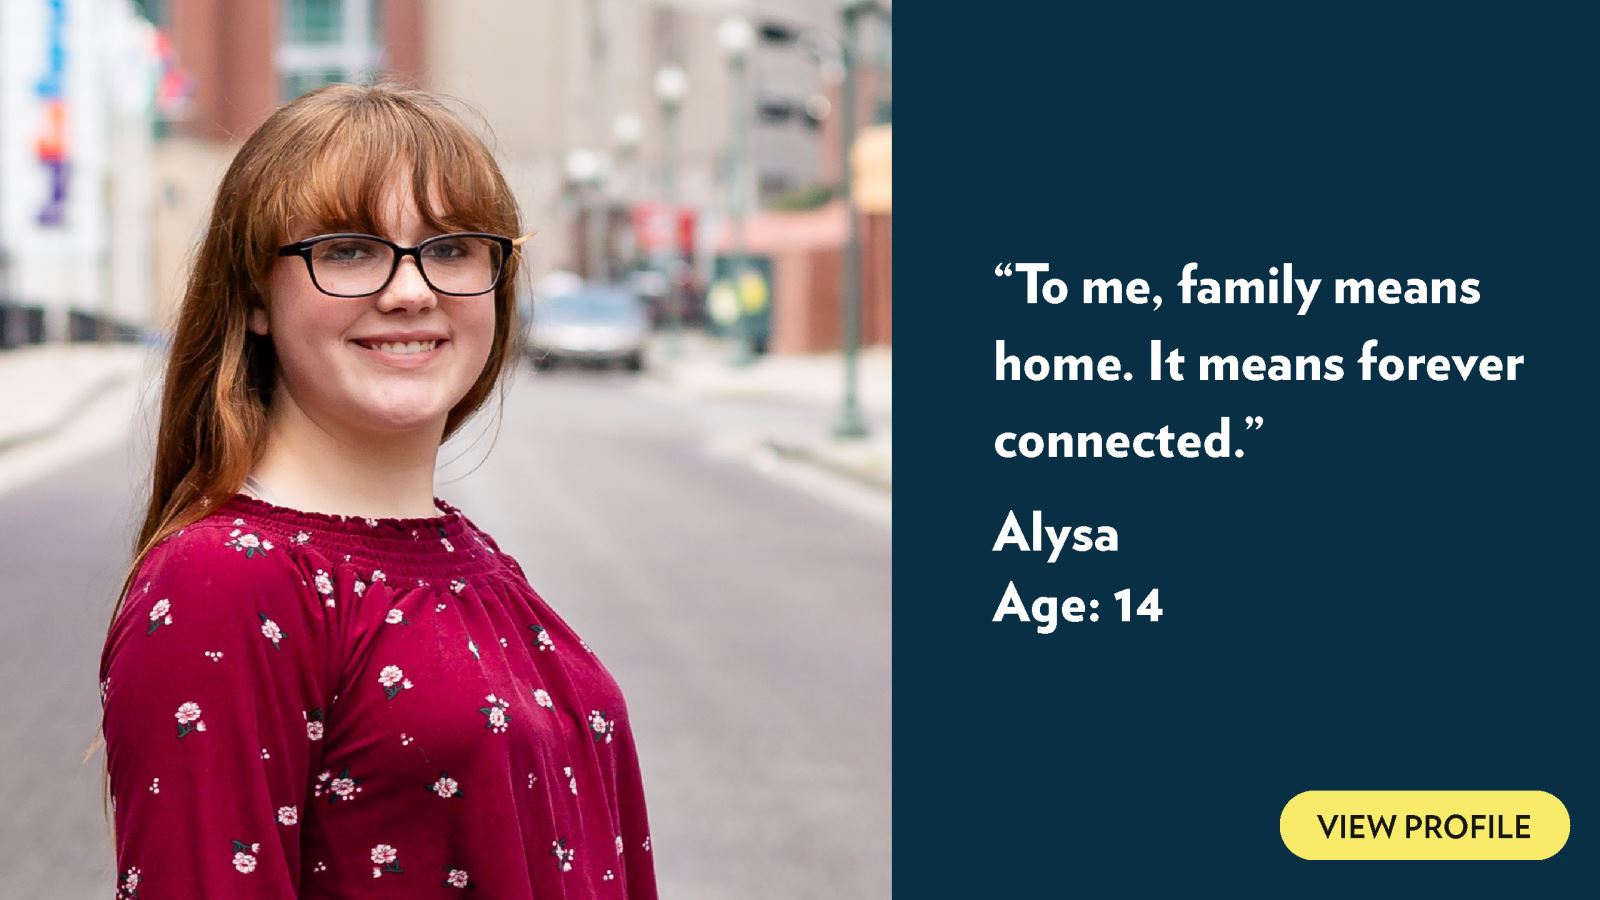 To me, family means home. It means forever connected. Alysa, age 14. View profile.